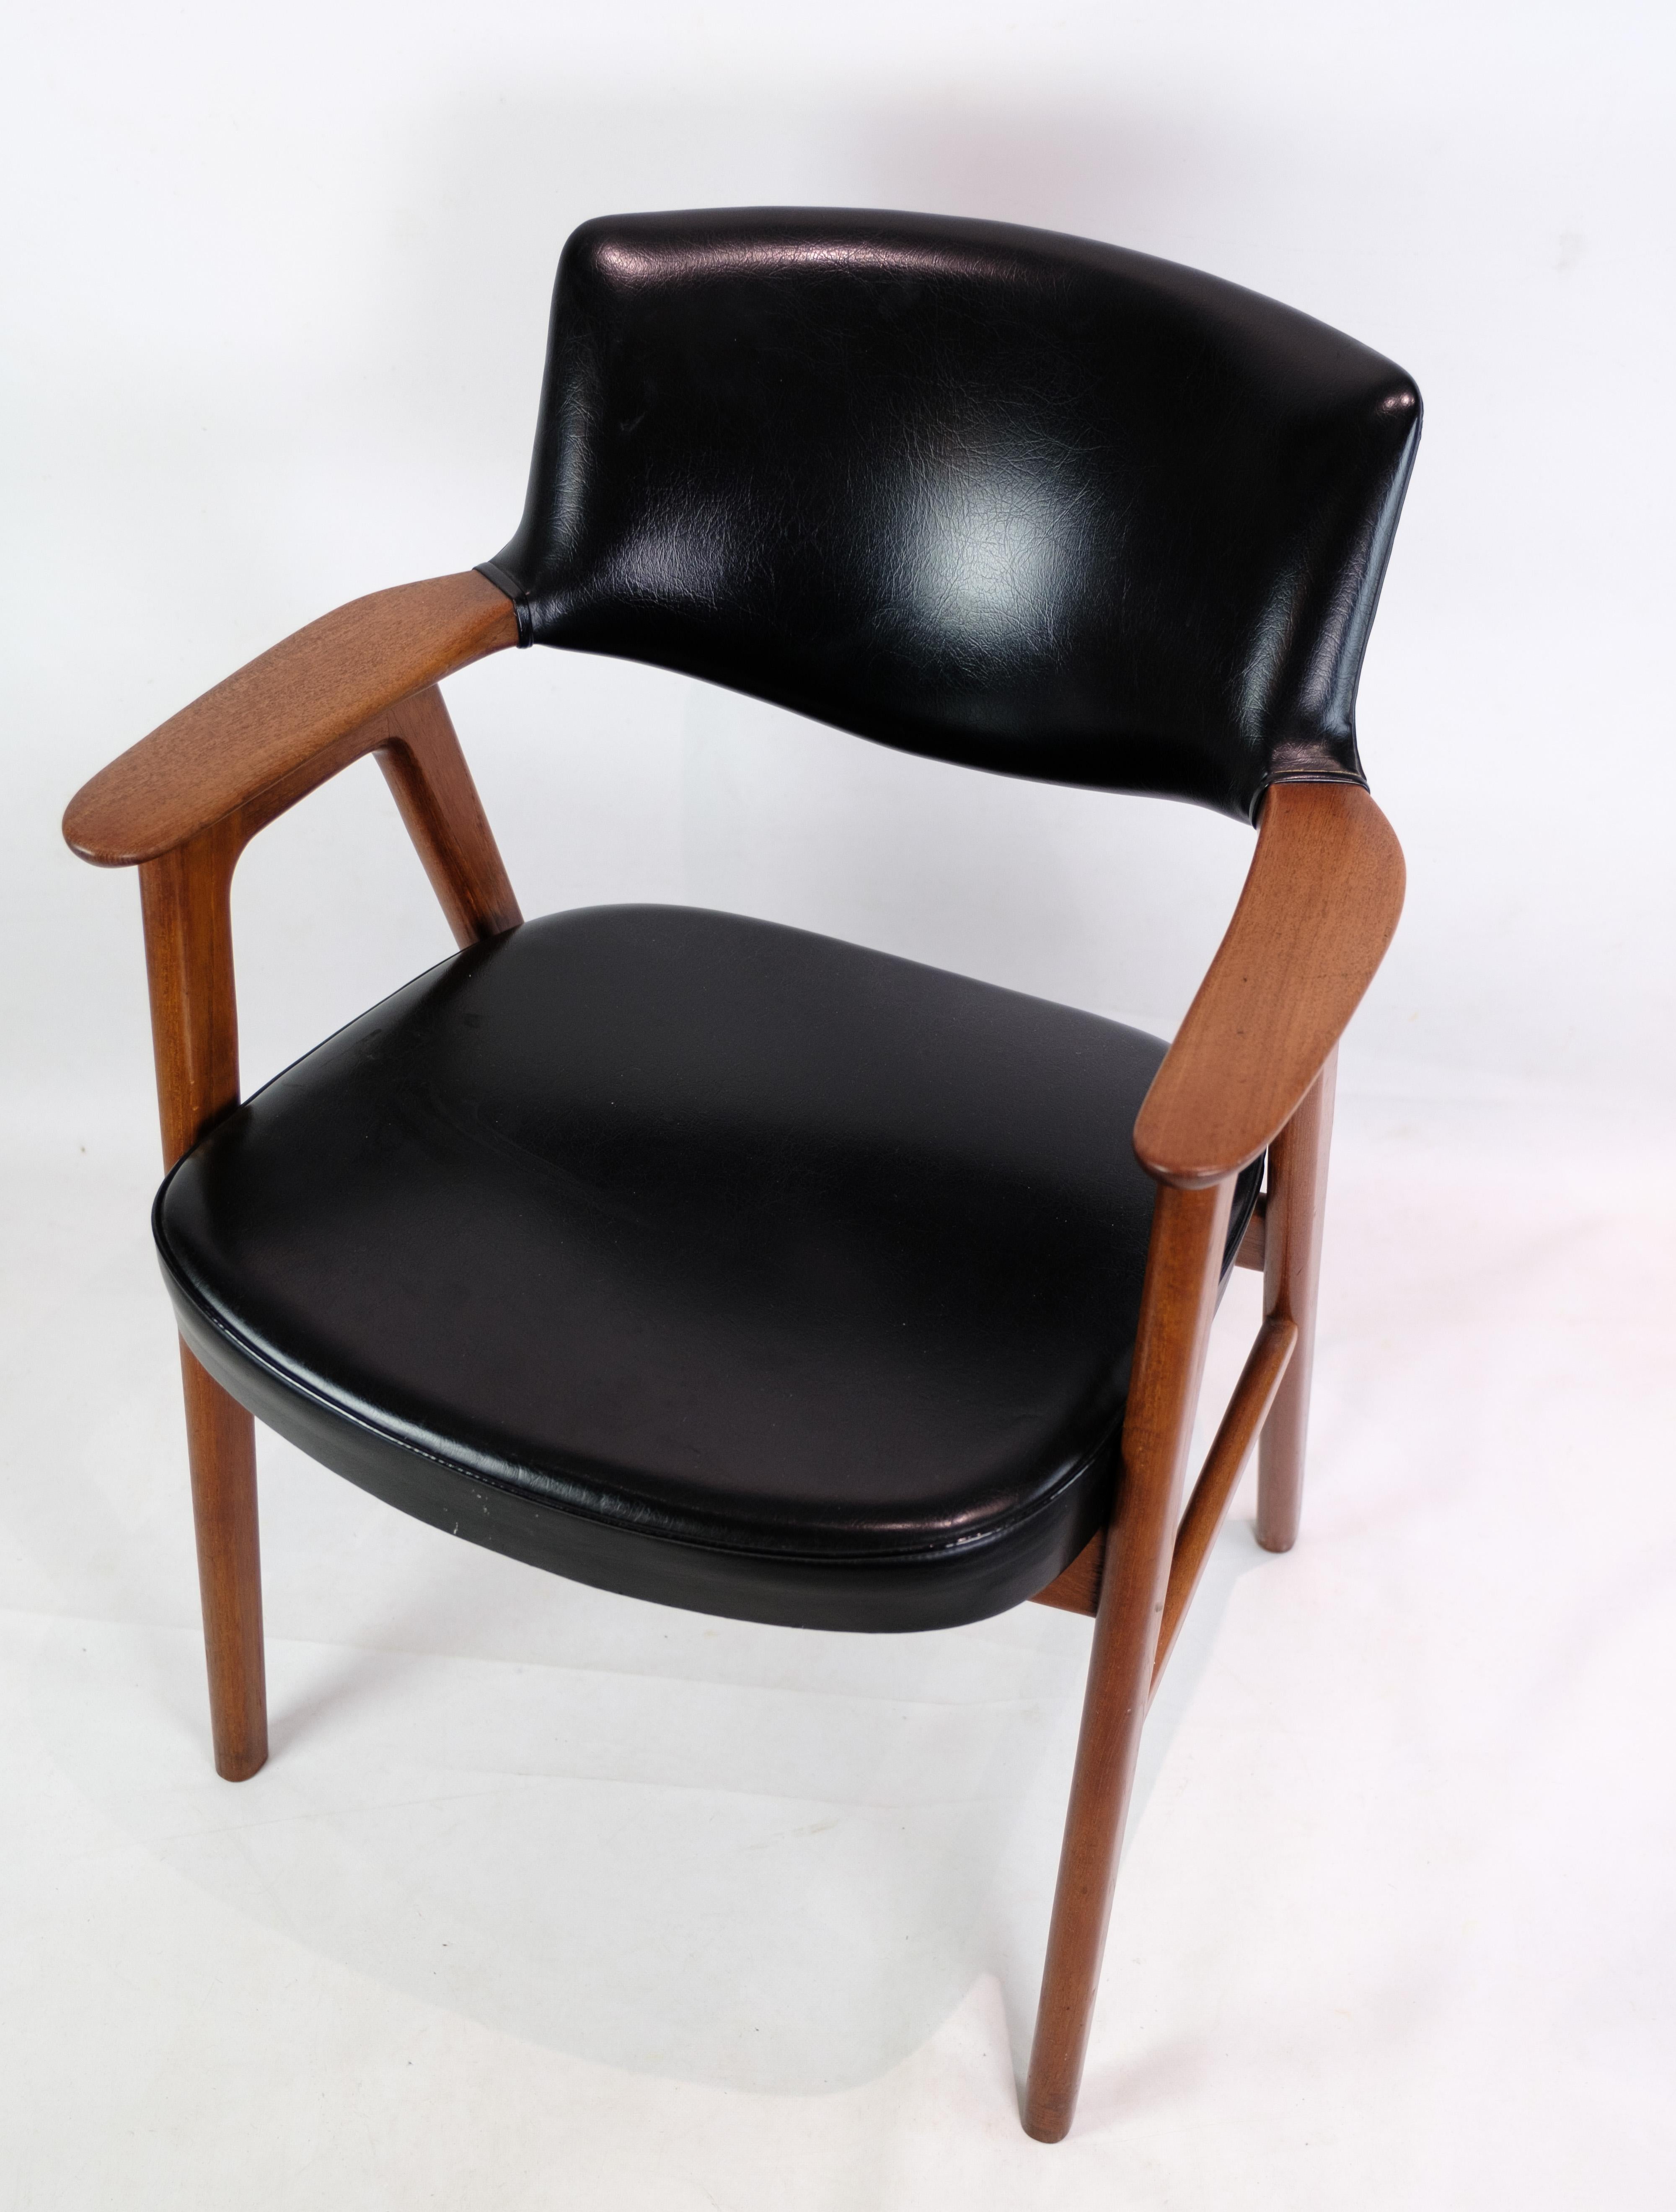 Armchair, model 43, designed by Erik Kirkegaard produced by Høng Stolefabrik from around the 1950s. The chair is in nice black leather. The chair has a teak frame and is in very good used condition.
Dimensions in cm: H: 83 W: 60.5 D: 53 SH: